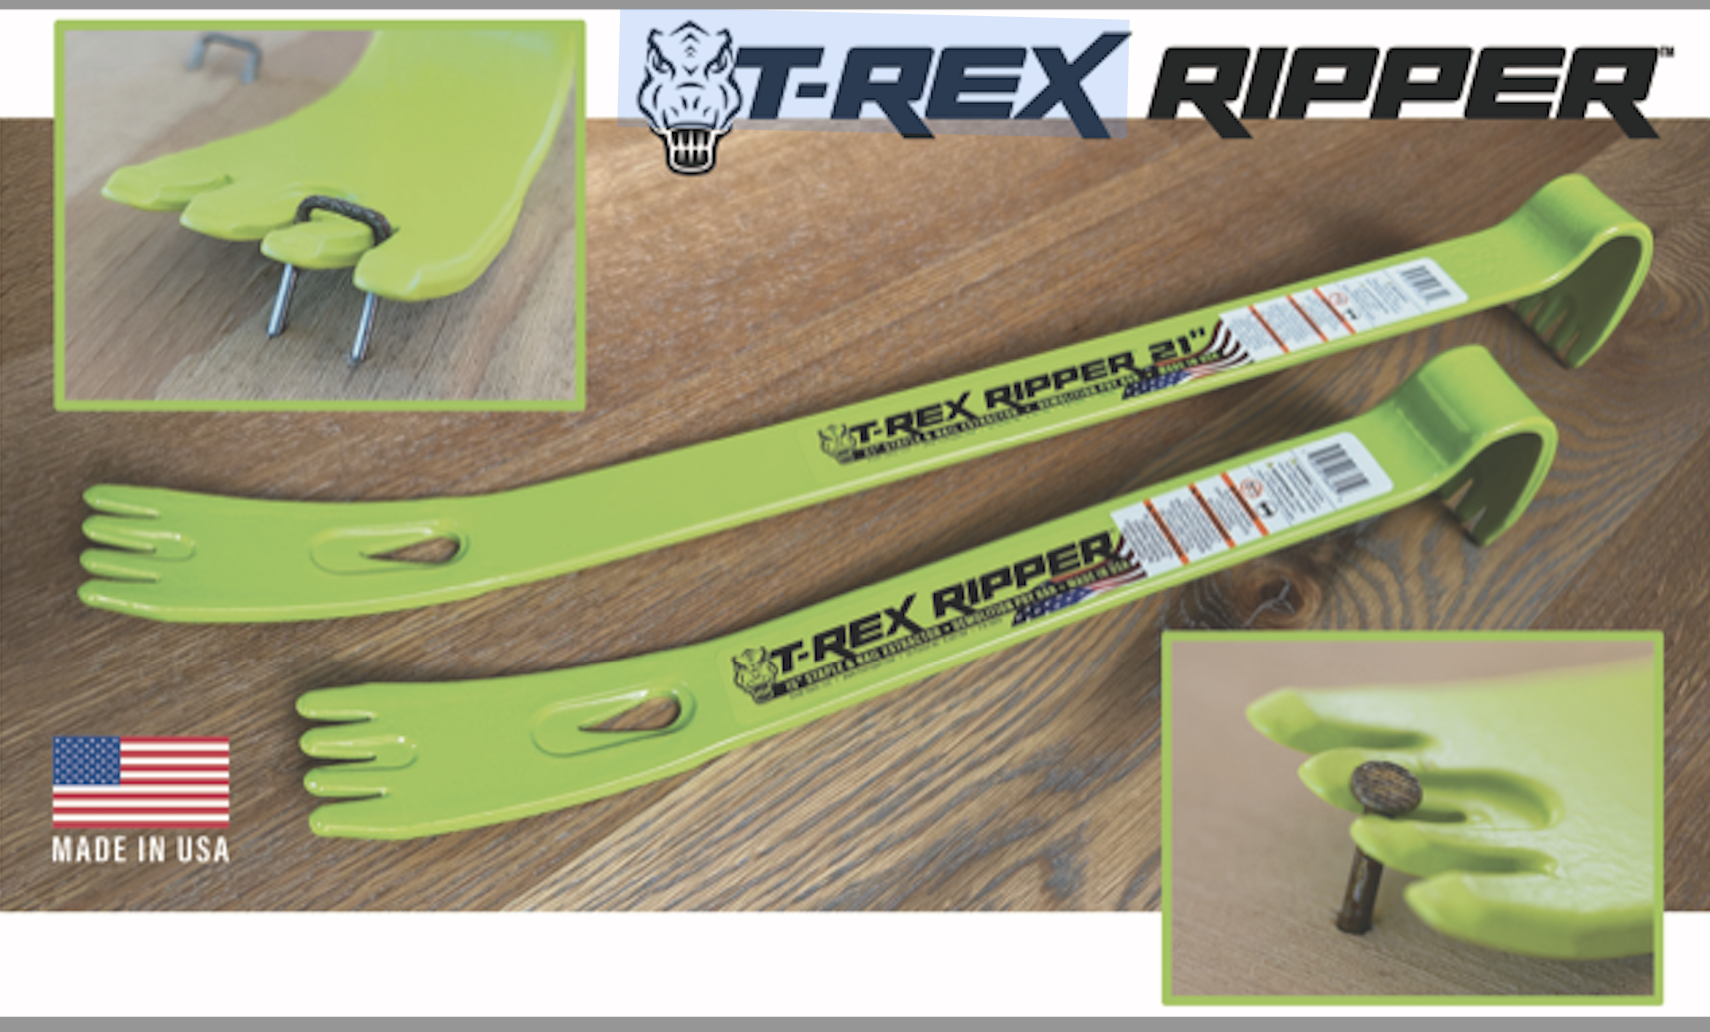 The T-Rex Ripper Staple & Nail Extractor/Demolition Pry Bar was designed to quickly remove staples, nails, and power cleats during demolition. 